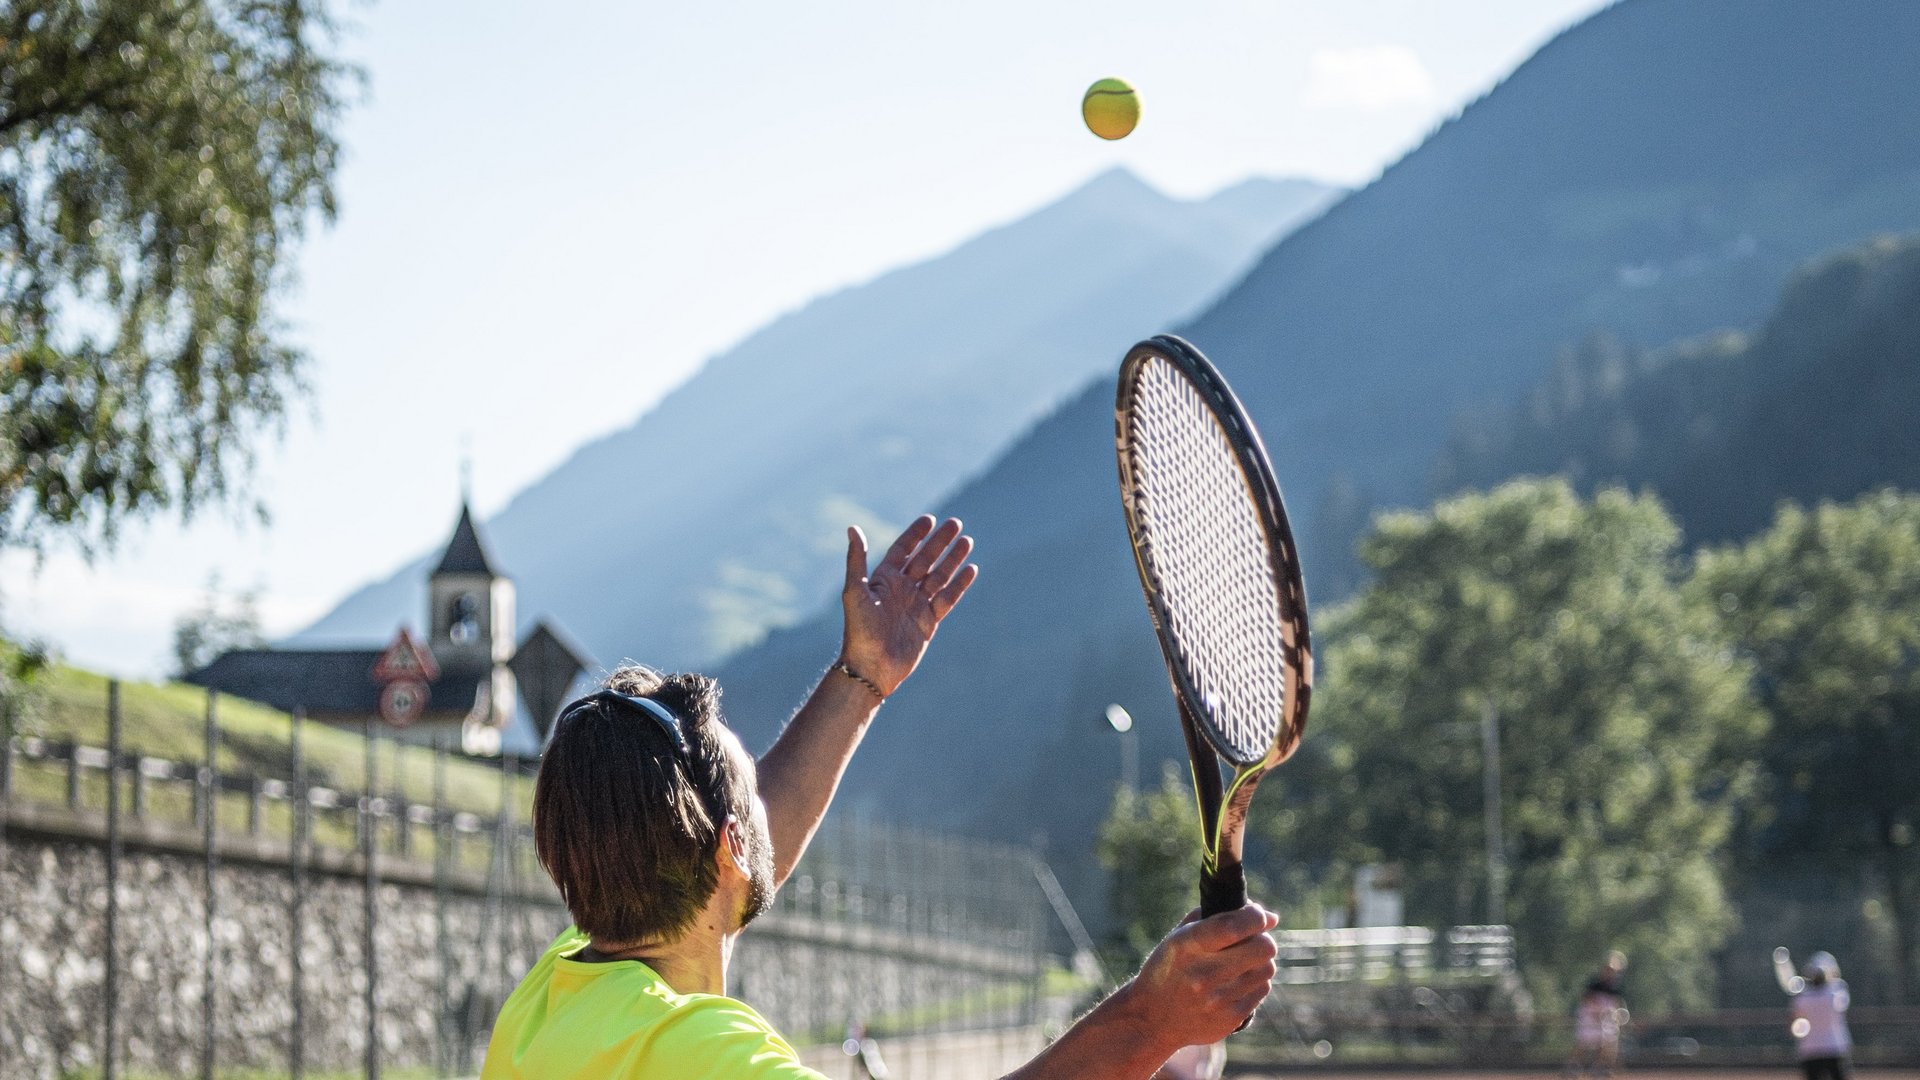 The Stroblhof, your tennis hotel in South Tyrol